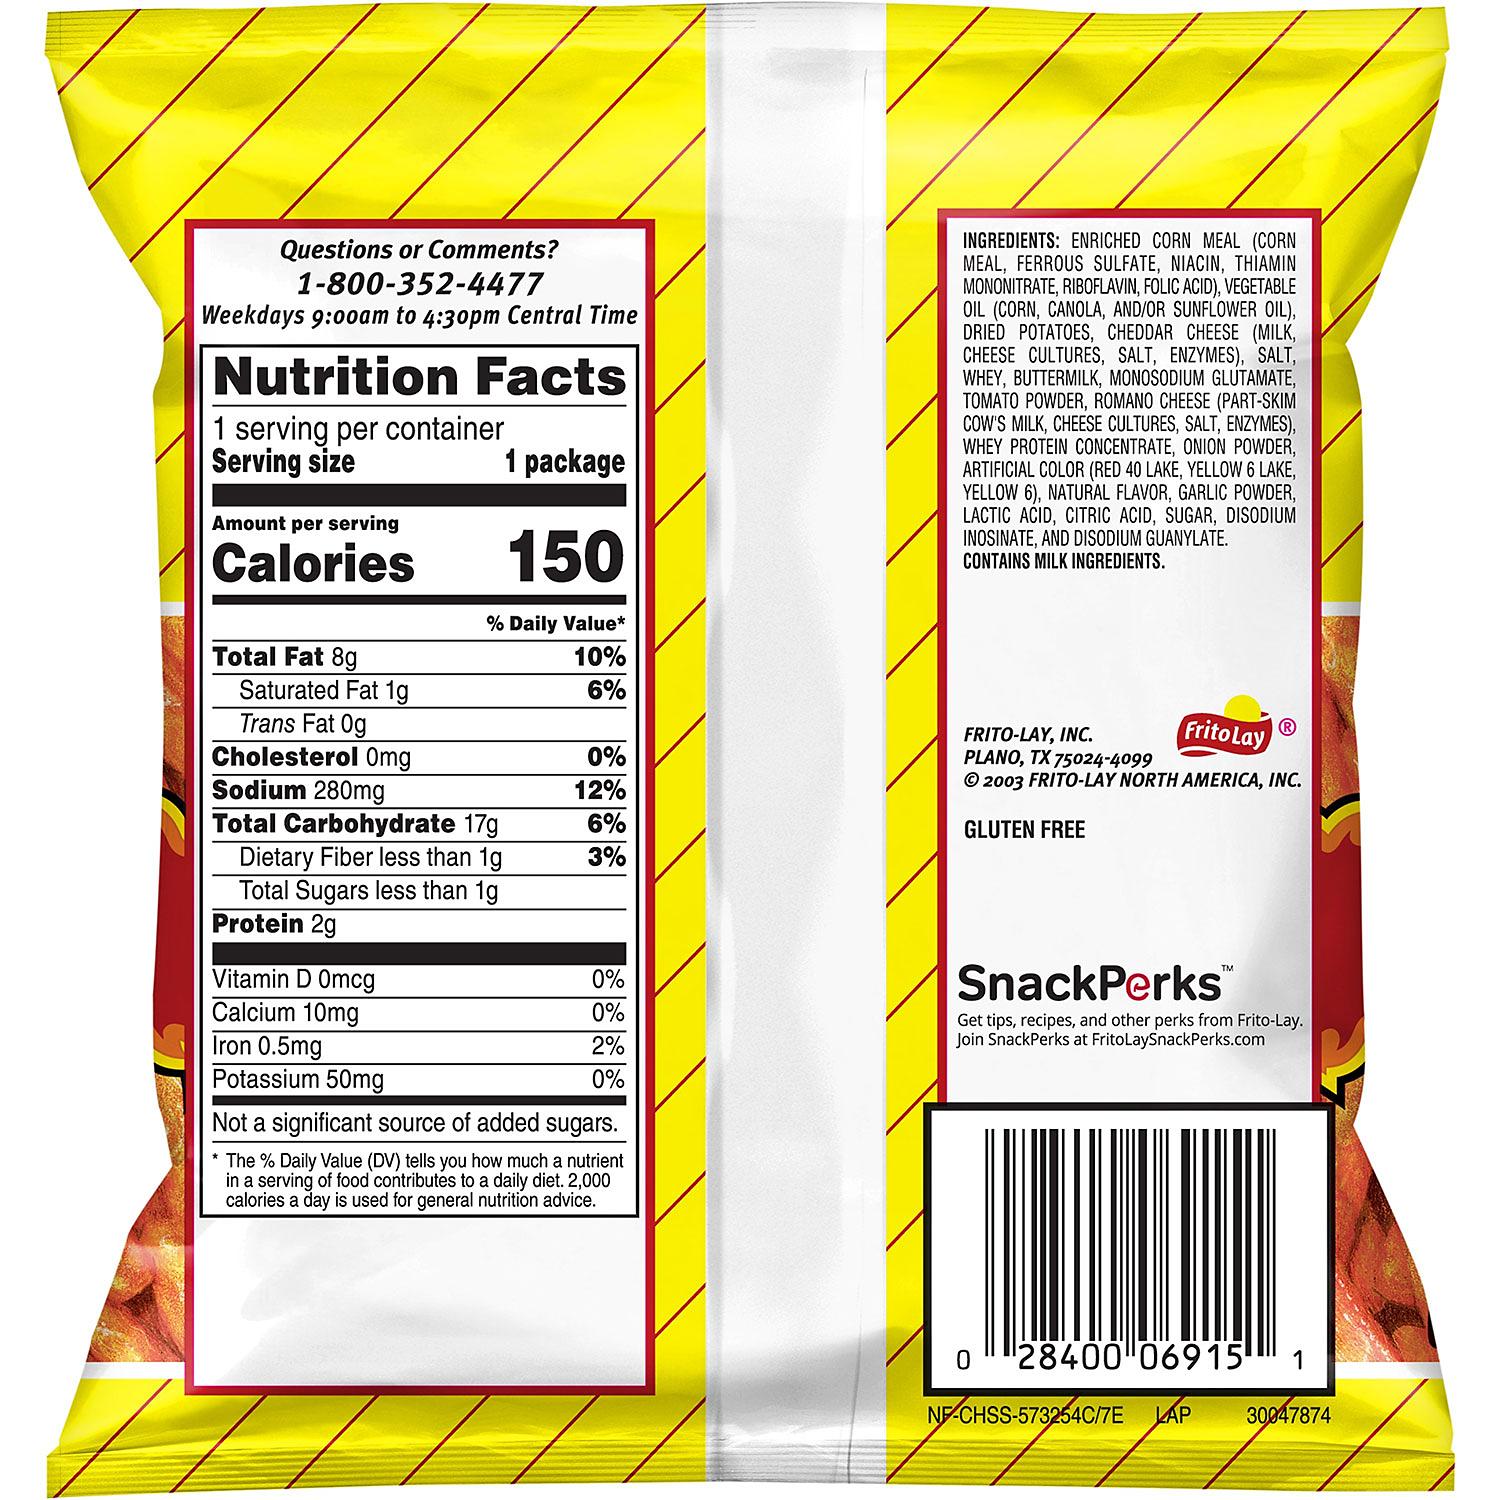 Chester's Chesters Hot Fries - 1 Ounce - 50 Count